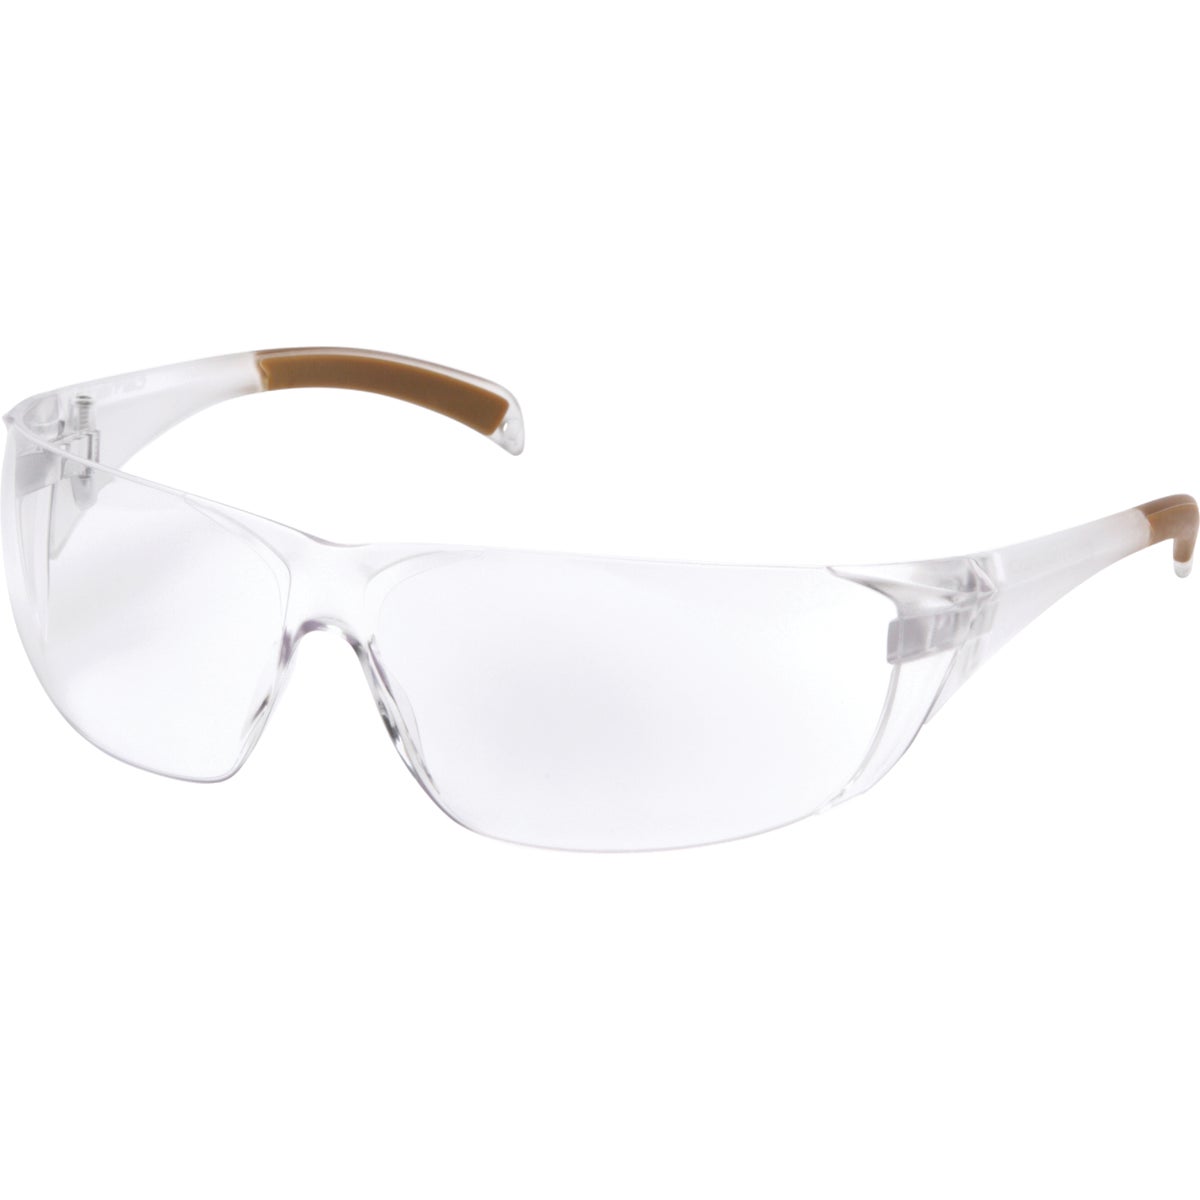 Billings Carhartt CH110S Carhartt Billings Clear Temple Safety Glasses with Clear Lenses CH110S